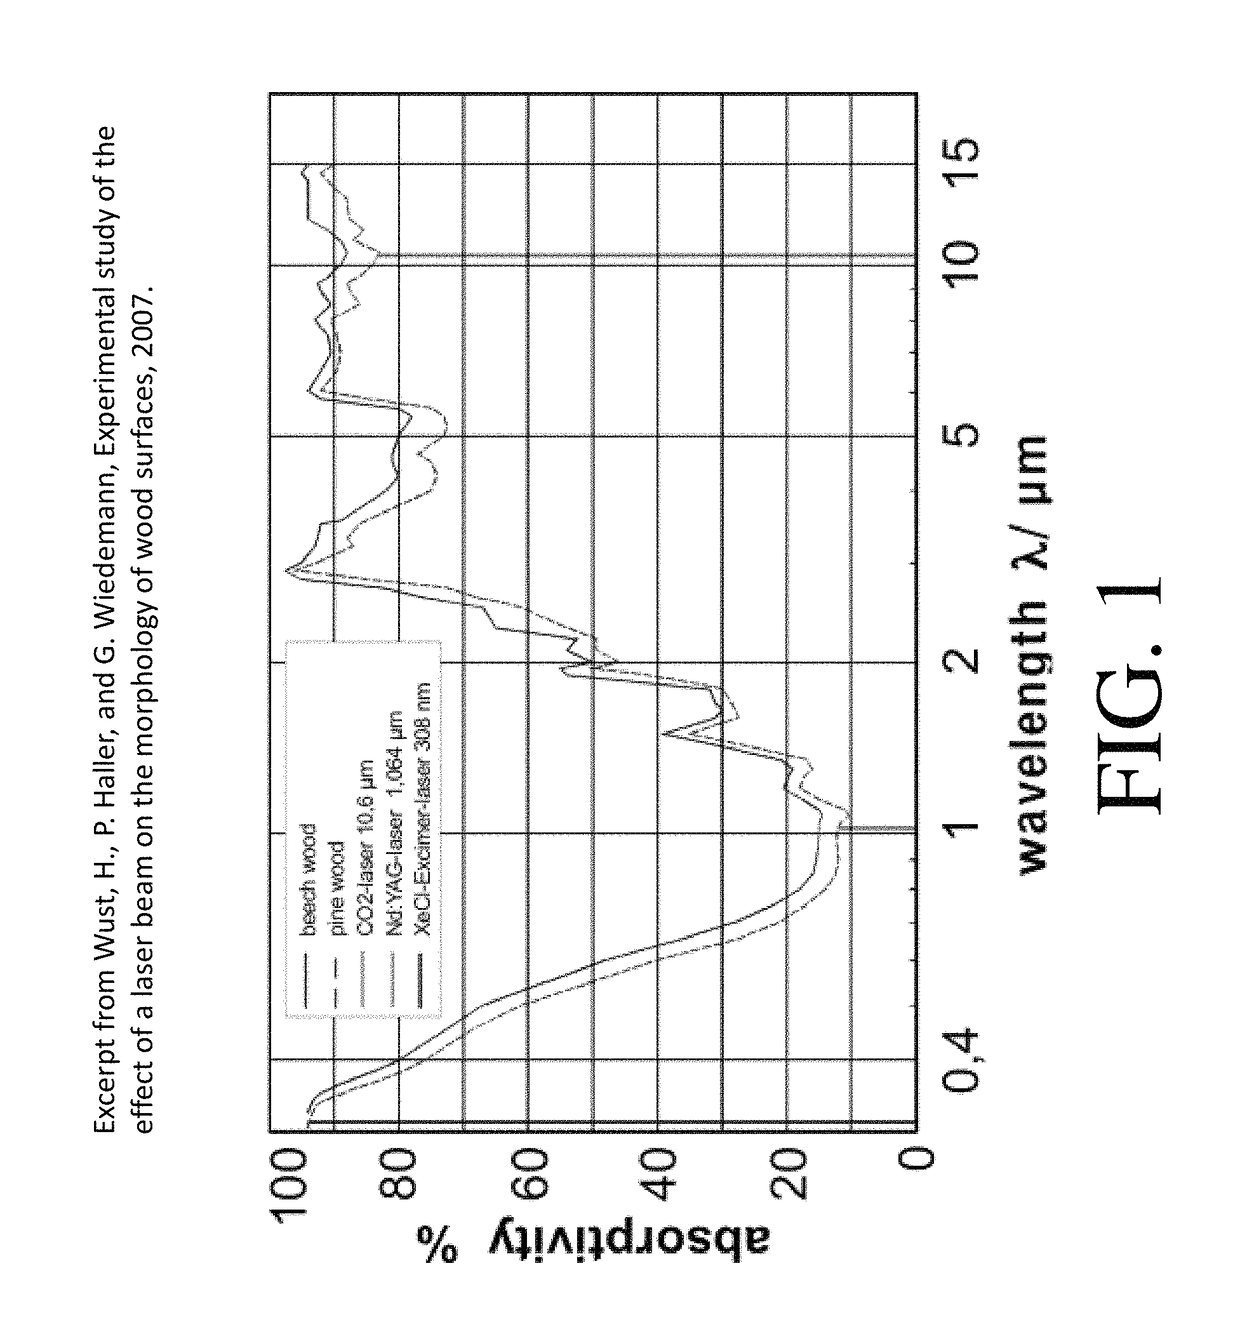 Process for bonding lignocellulosic substrates without an added adhesive and products thereof